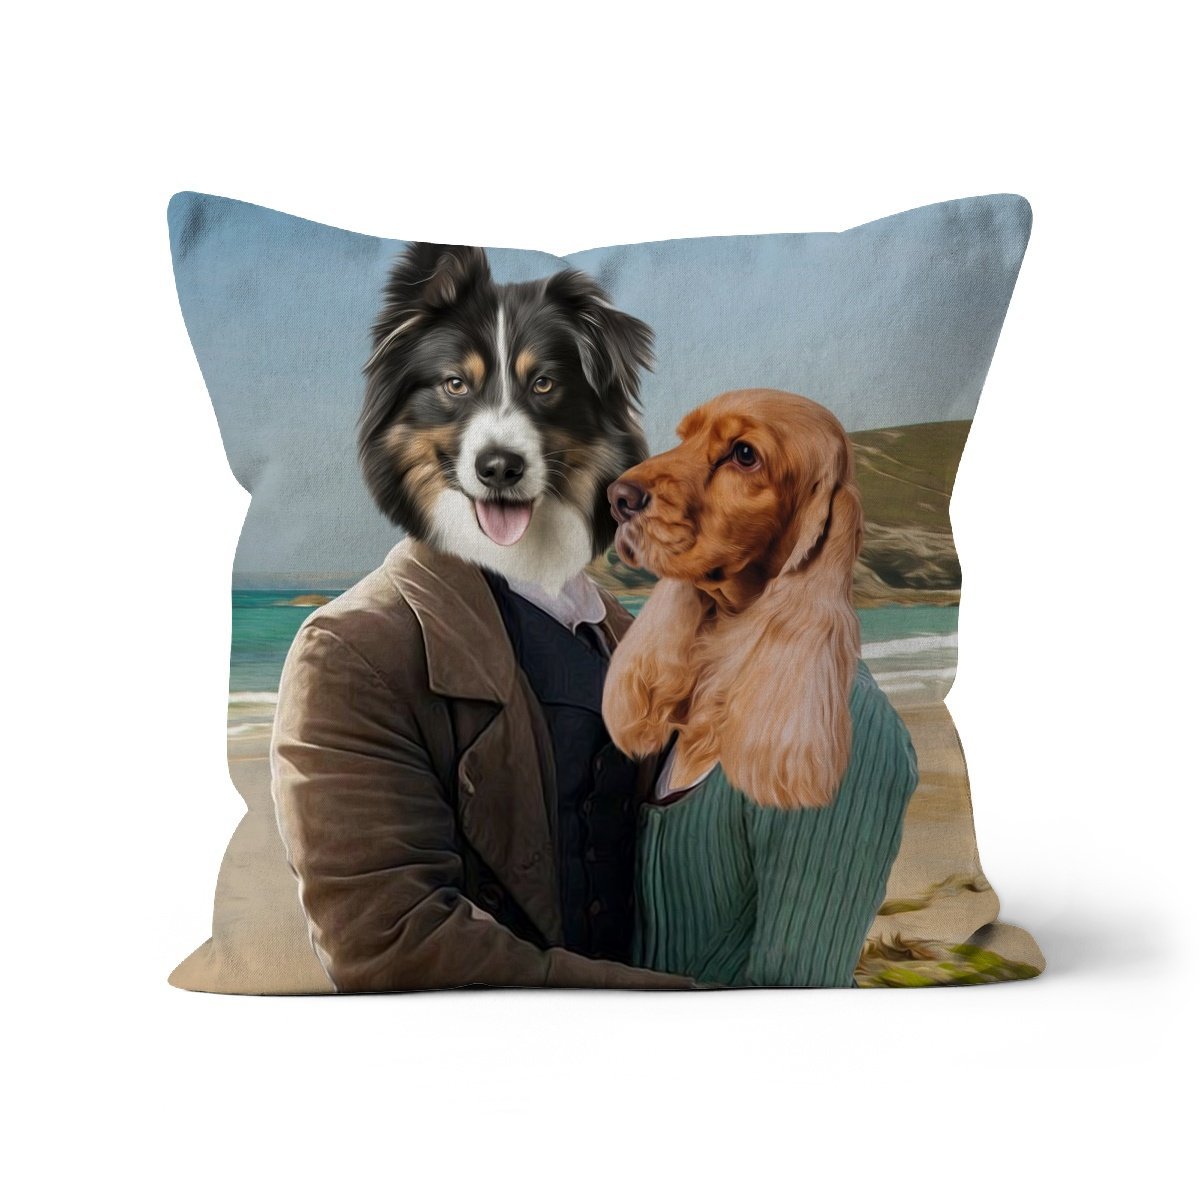 Poldark: Custom Pet Cushion - Paw & Glory - #pet portraits# - #dog portraits# - #pet portraits uk#paw and glory, pet portraits cushion,pet face pillows, personalised pet pillows, pillows with dogs picture, custom pet pillows, pet print pillow